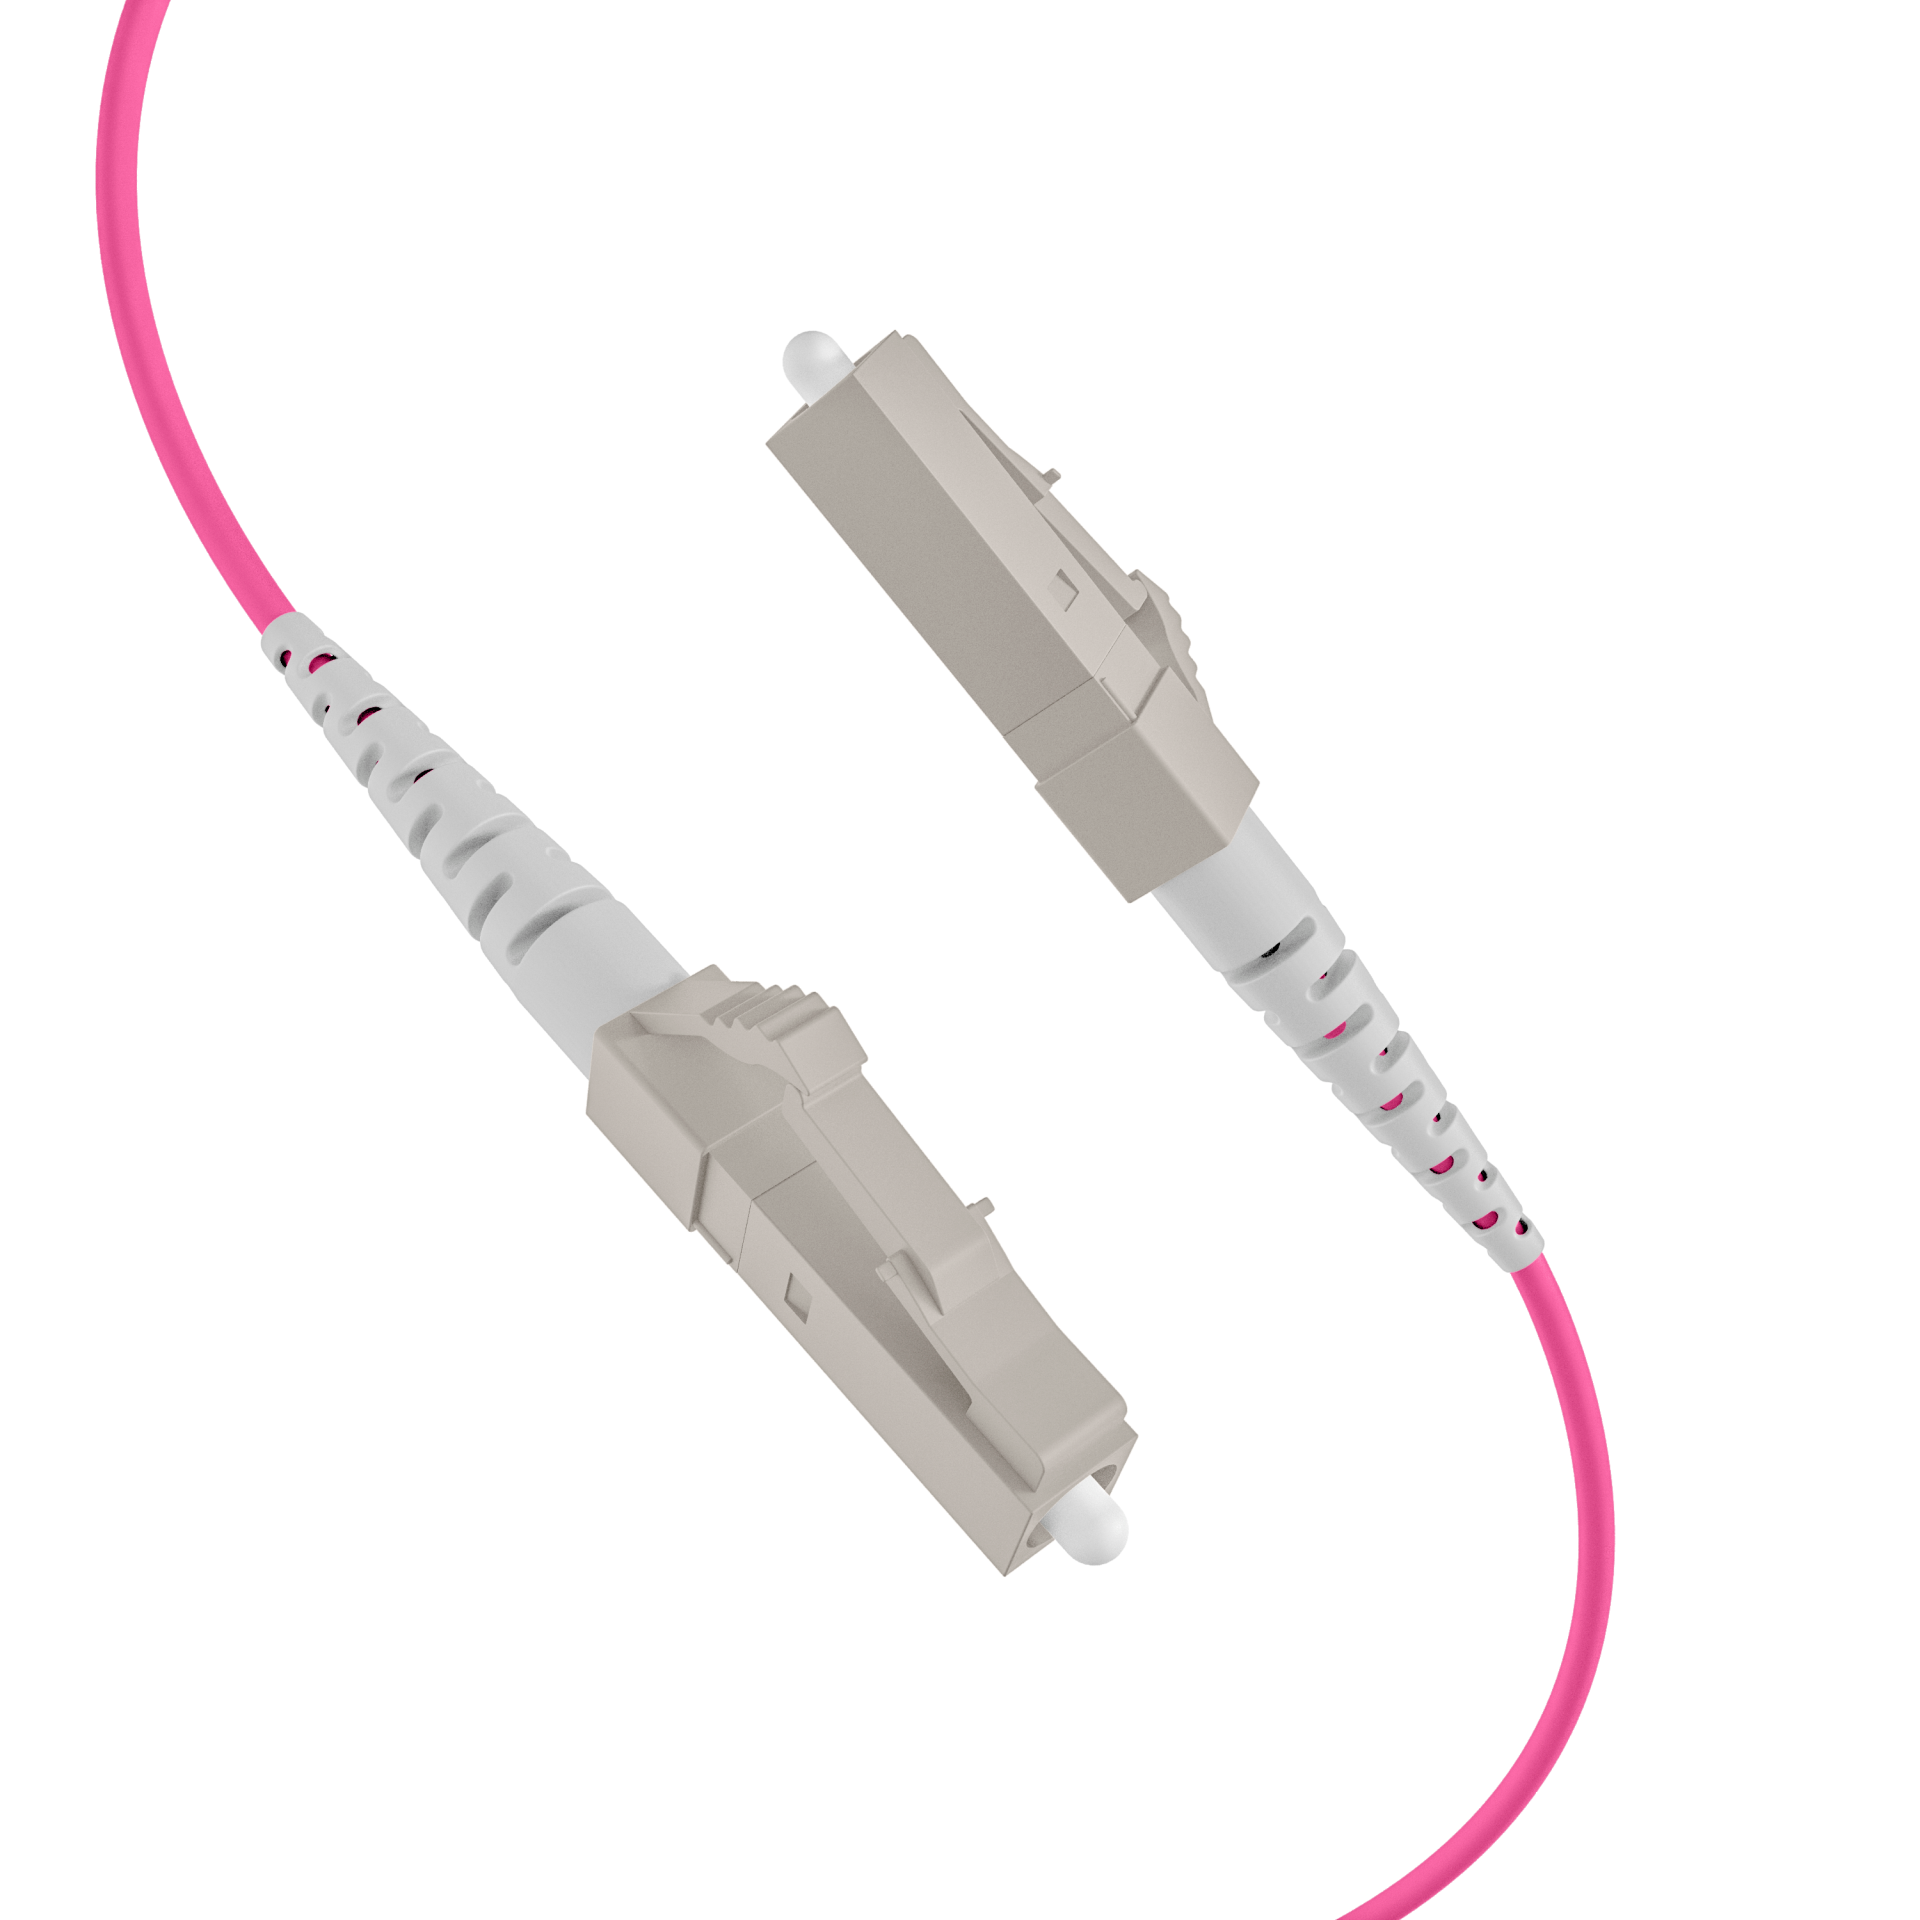 Trunkcable U-DQ(ZN)BH OM4 8G (1x8) LC-LC,50m Dca LSZH